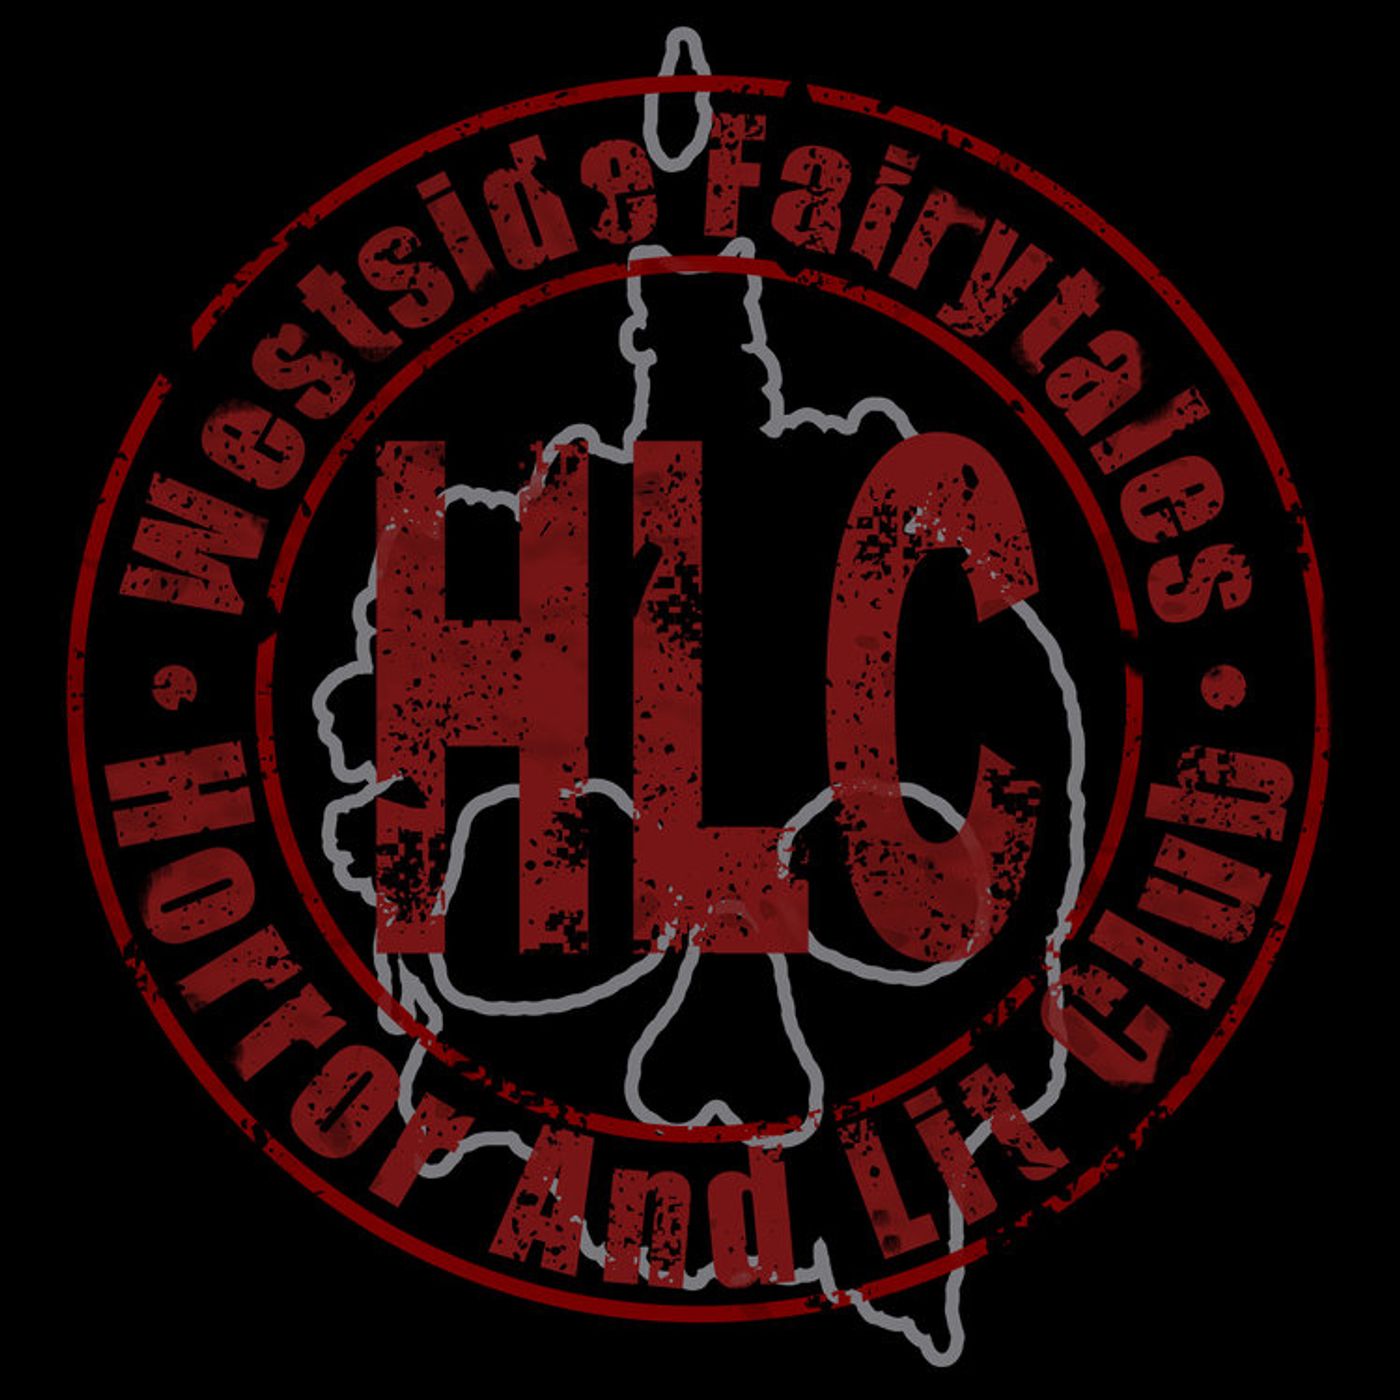 HLC - "Malignant" and "Candyman"